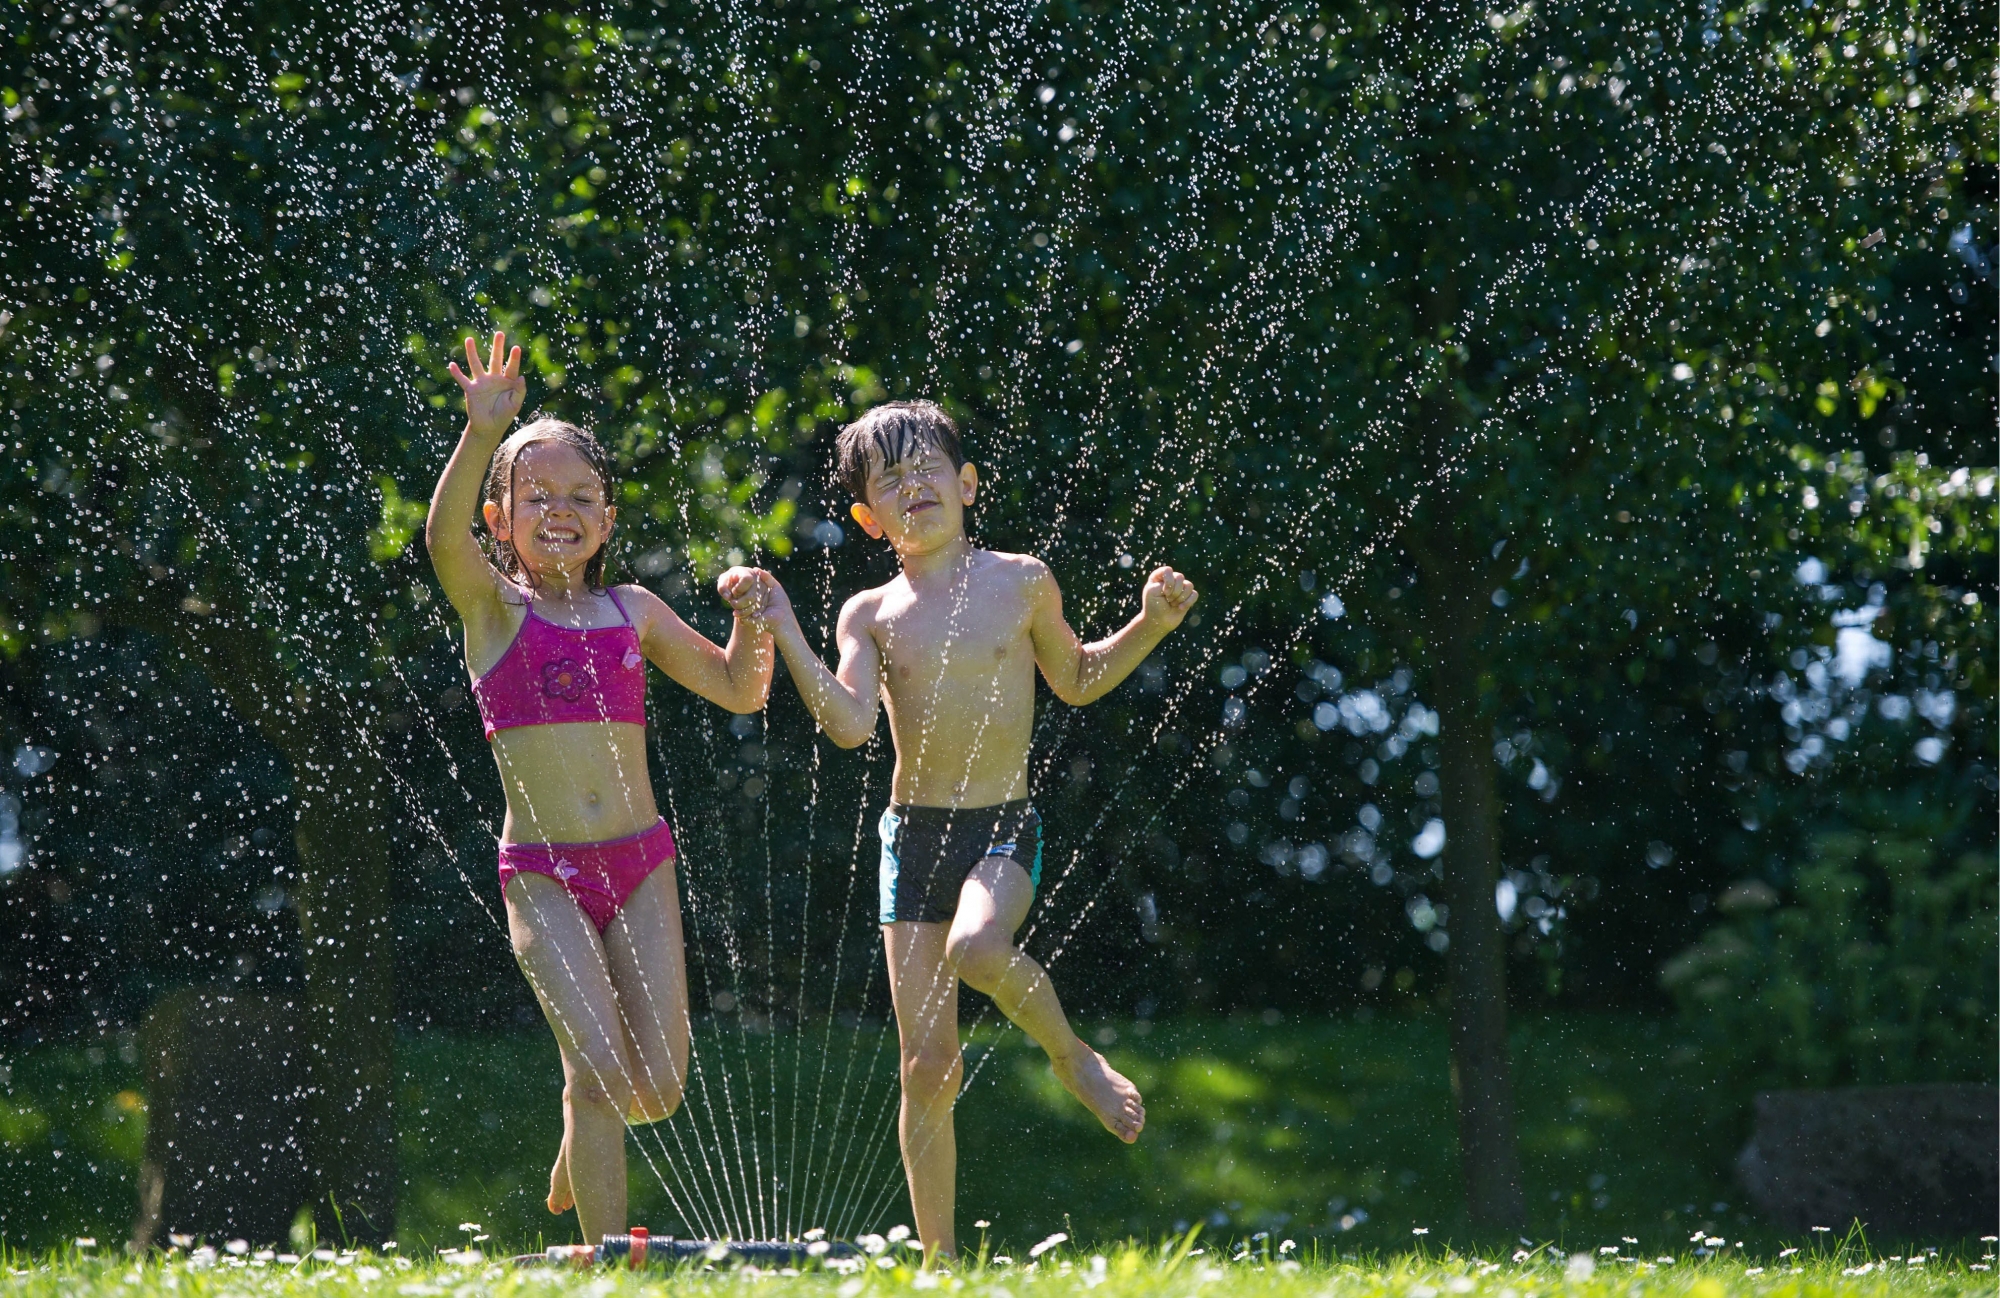 epa03365281 Amy and Jannik jump through the water fountain of a lawn sprinkler in a garden in Sieversdorf, Germany, 19 August 2012. Meteorologists predict this weekend to be the hottest of the year so far with temperatures reaching some 38 degrees celsius.  EPA/PATRICK PLEUL GERMANY WEATHER